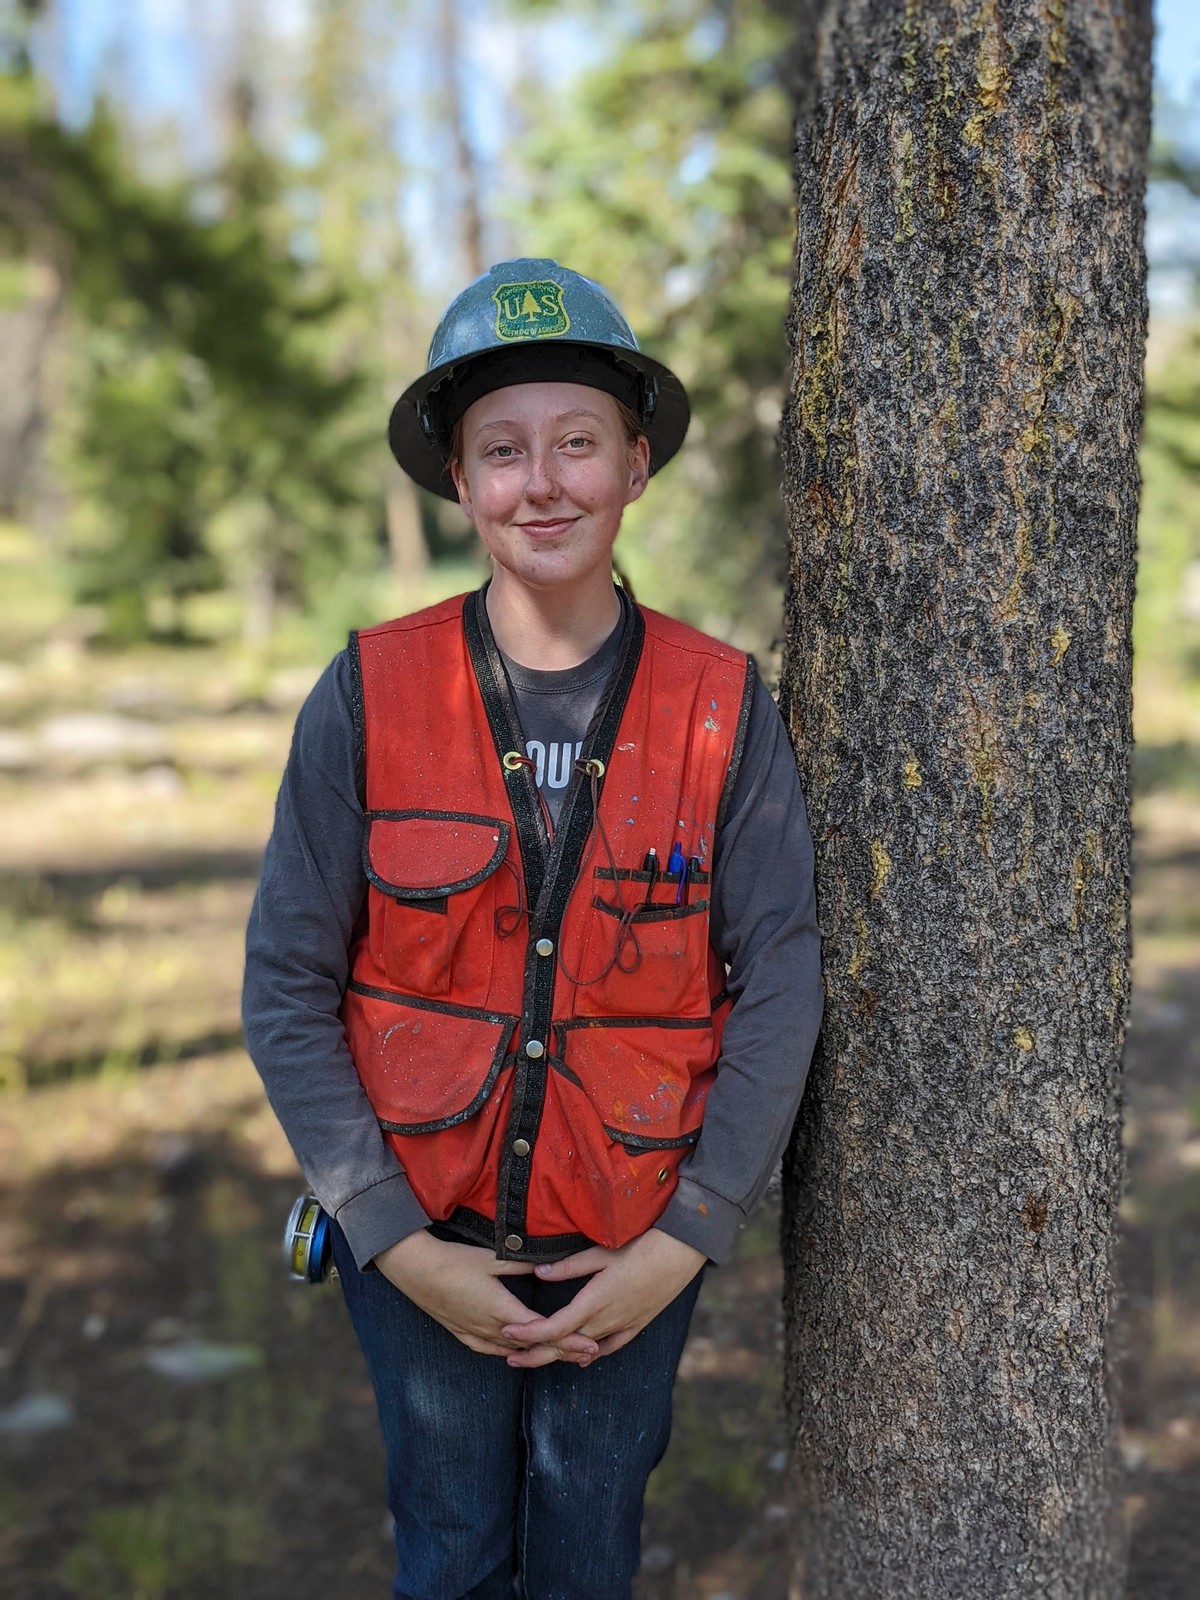 A woman standing in a forest wears a U.S. Forest Service helmet and vest.